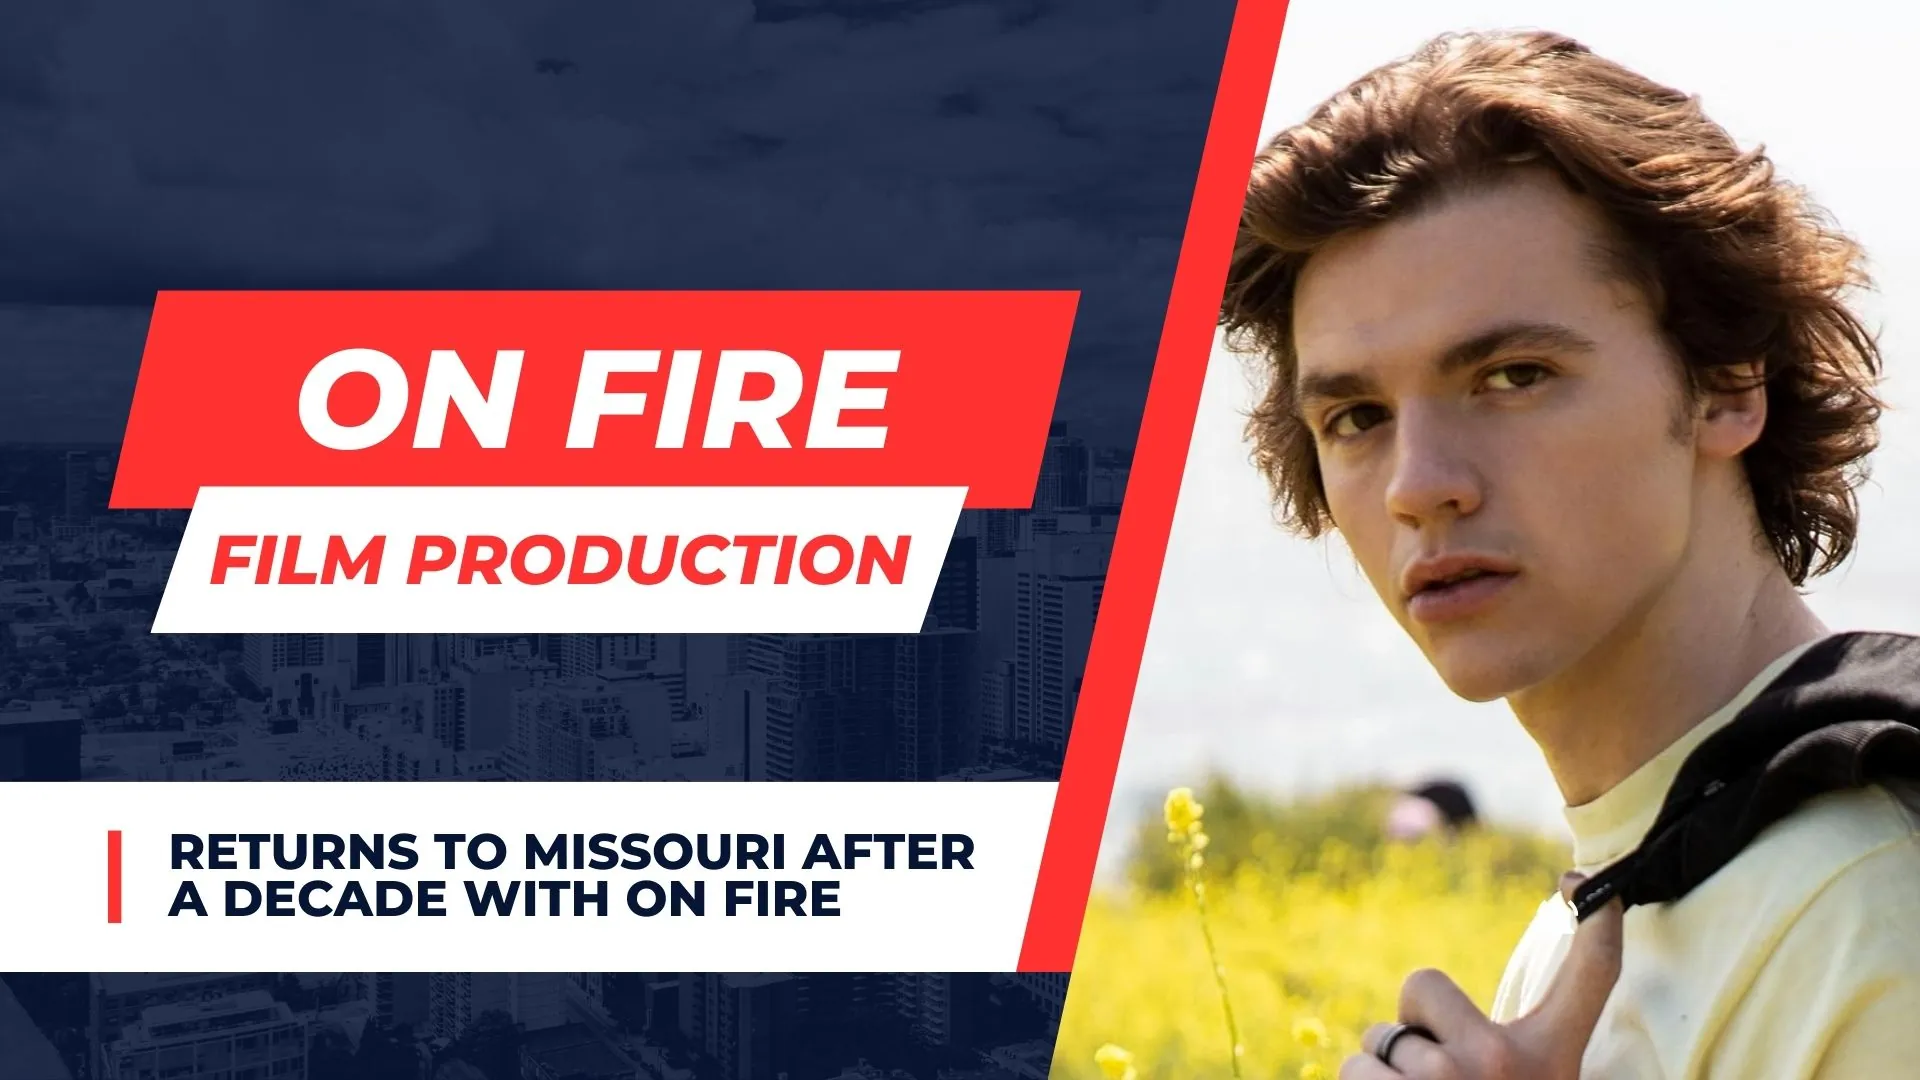 Major Film Production Returns to Missouri After a Decade with On Fire